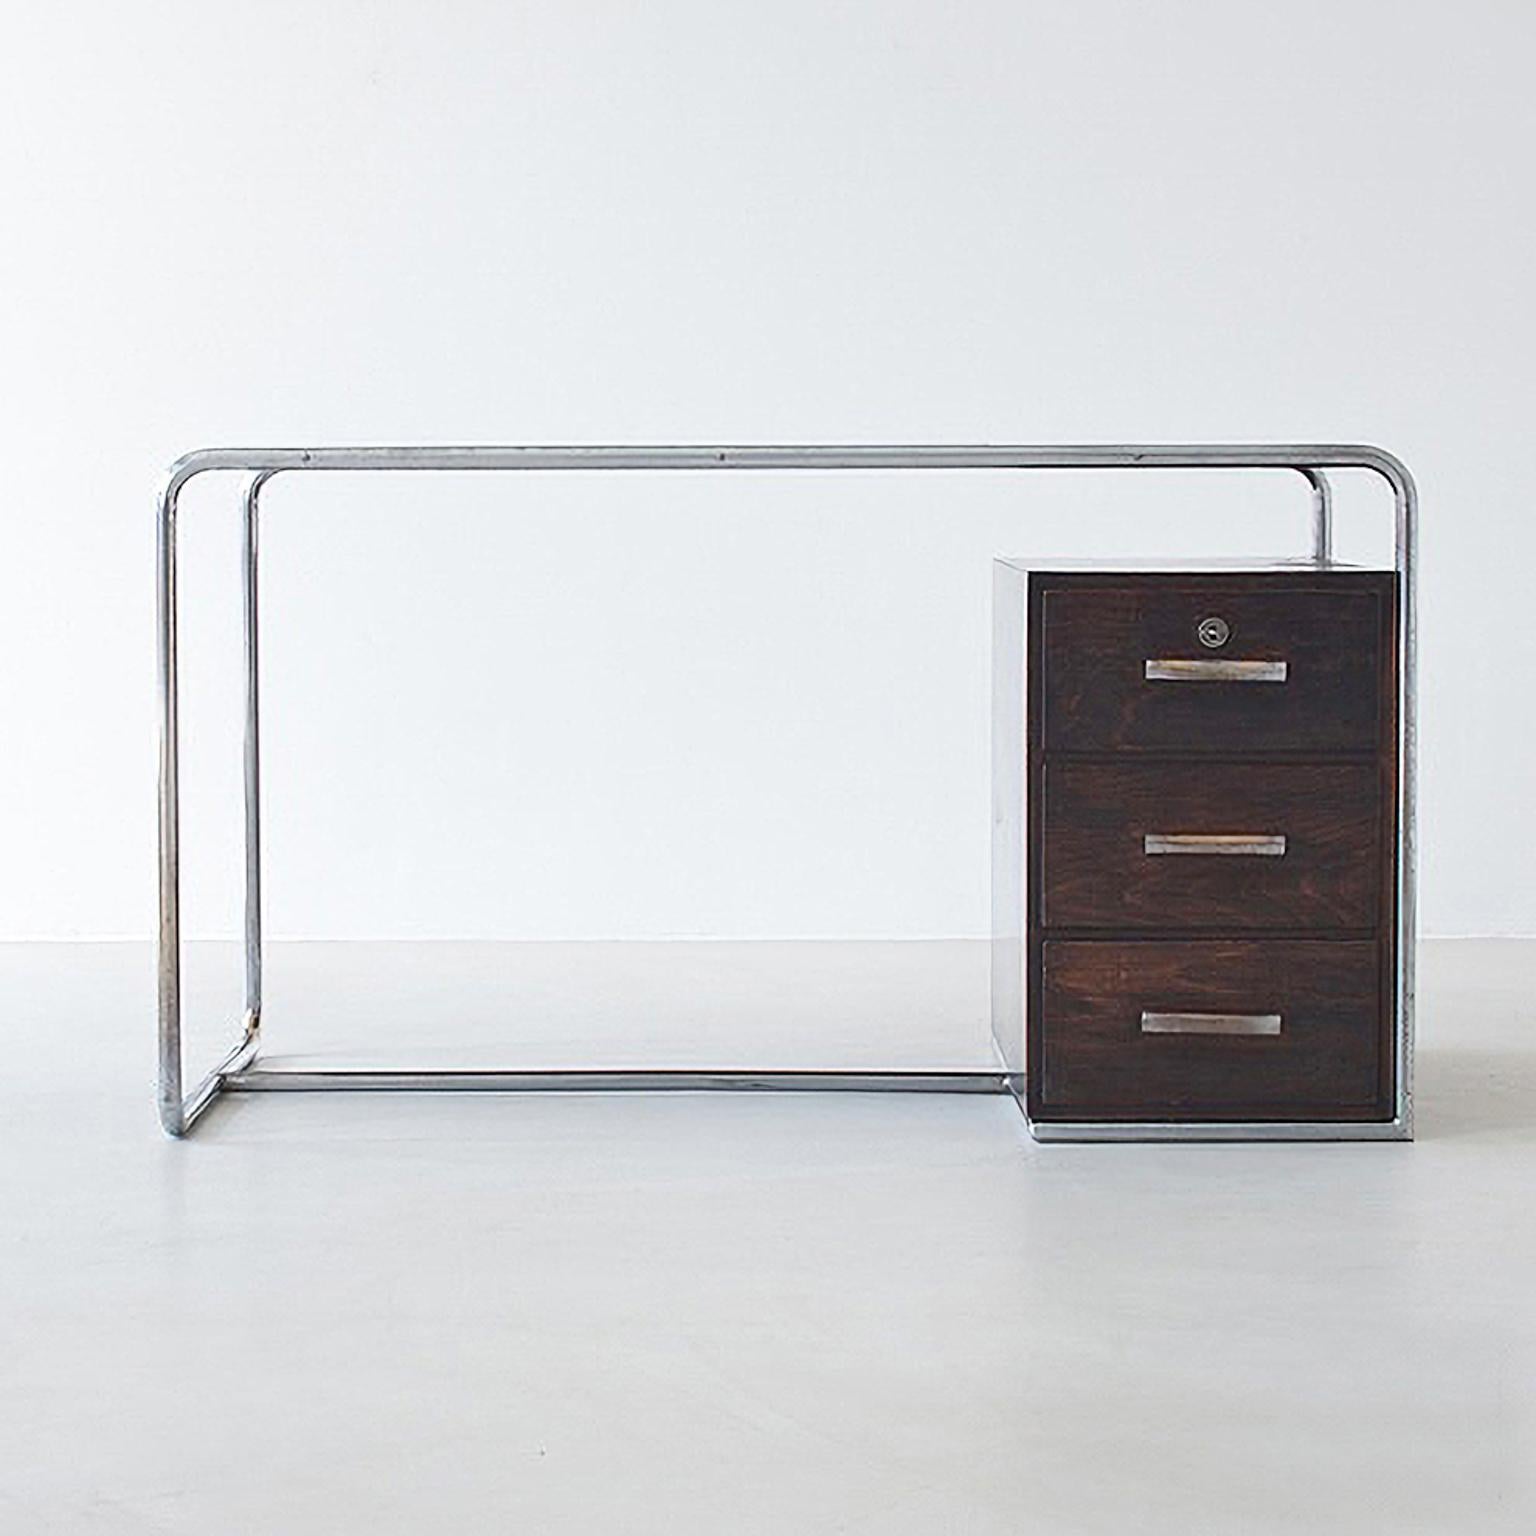 Metal Bauhaus Tubular Steel Desk by Bruno Weil for Thonet, Stained Wood, Germany, 1930 For Sale